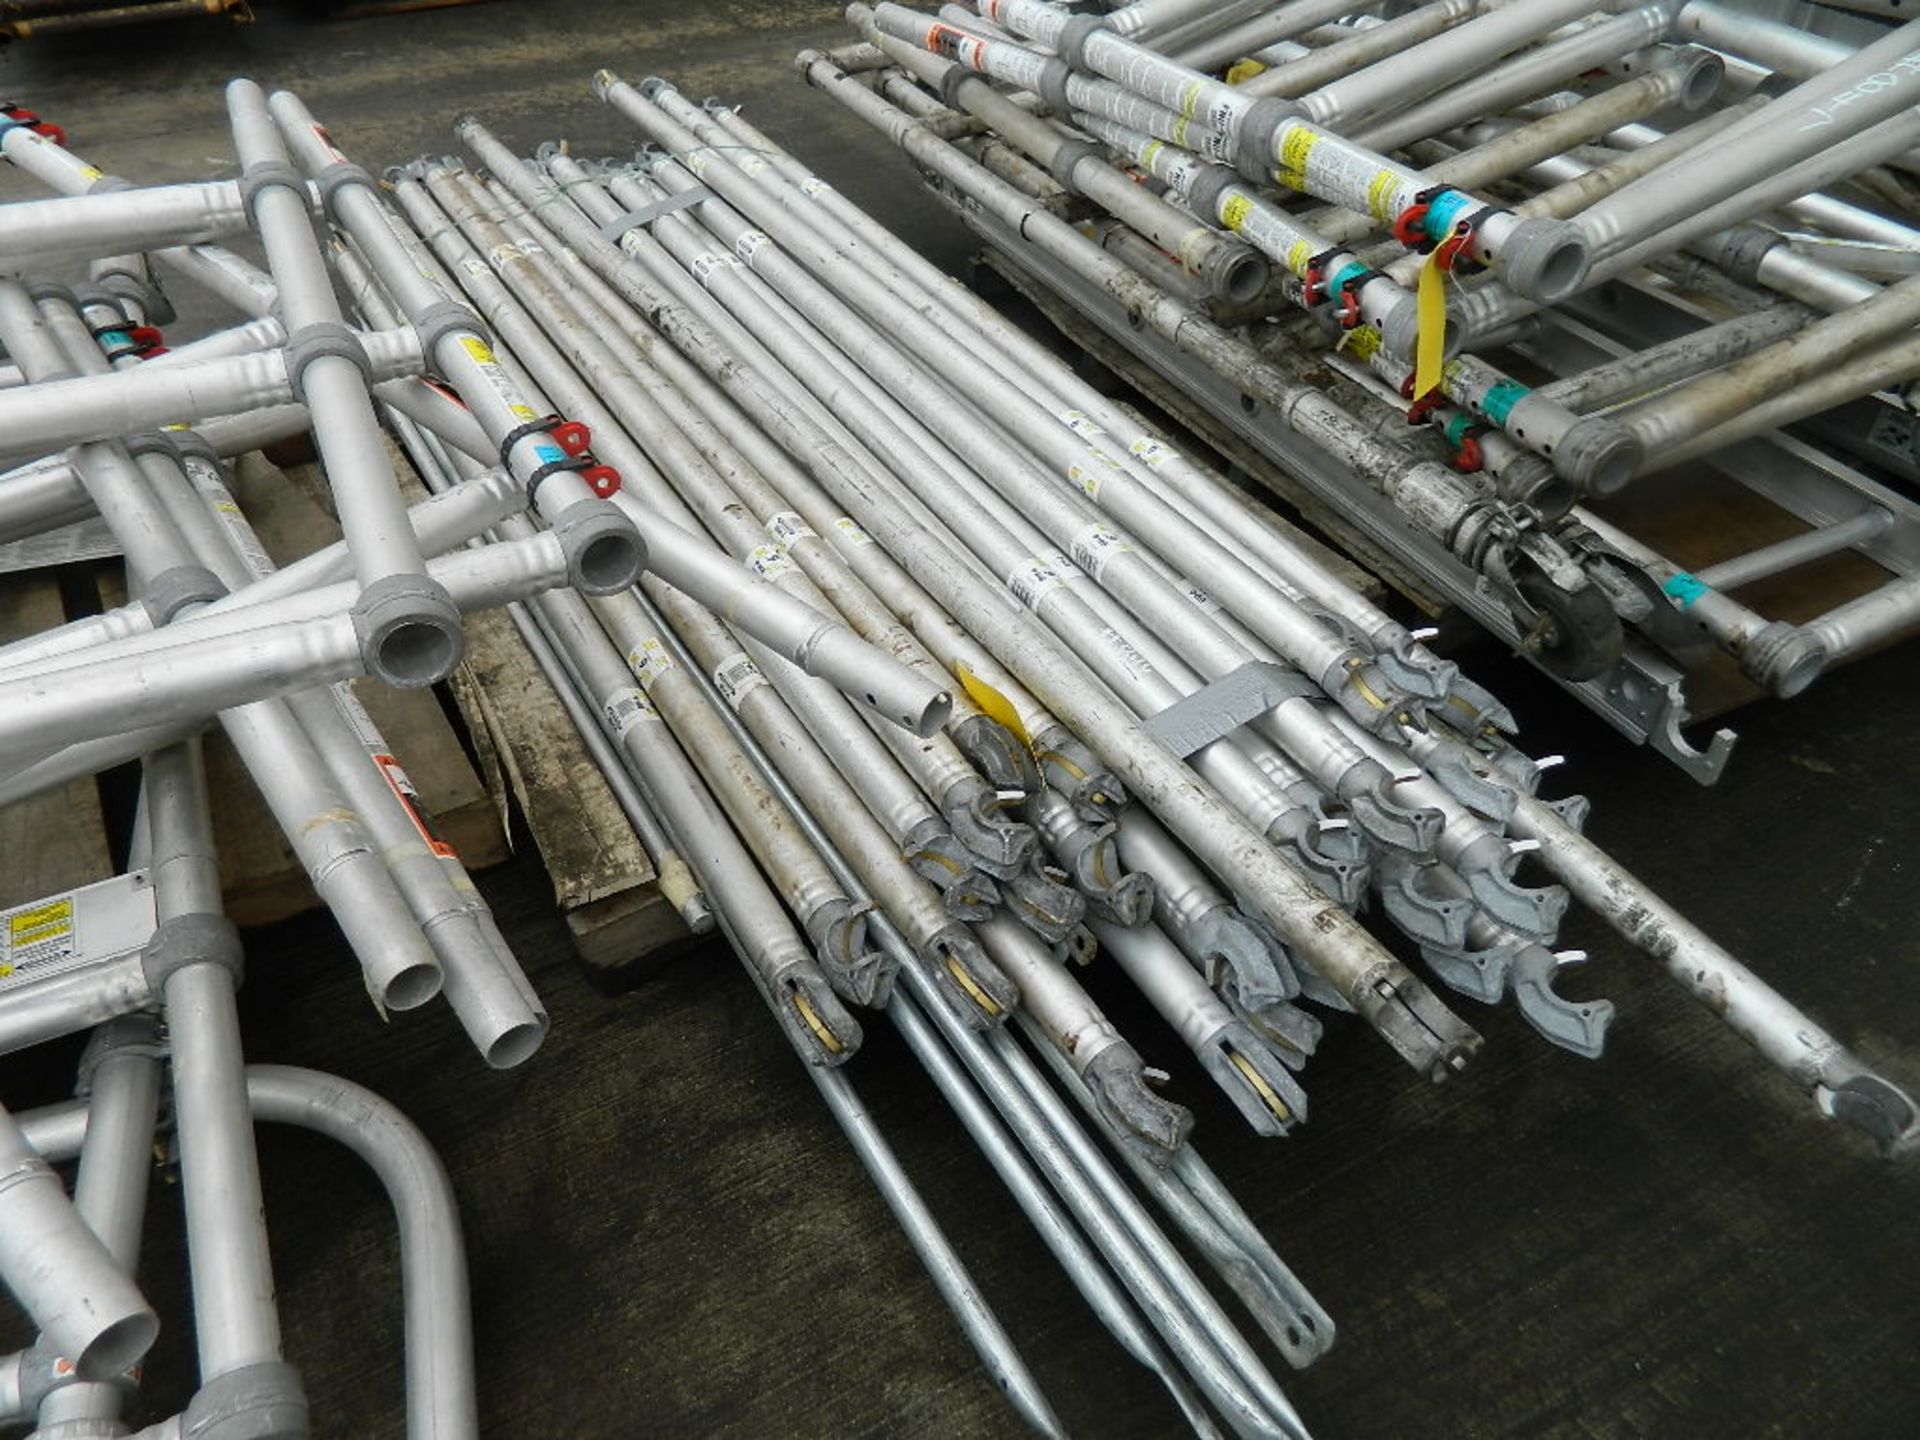 SKID OF SCAFFOLD PARTS